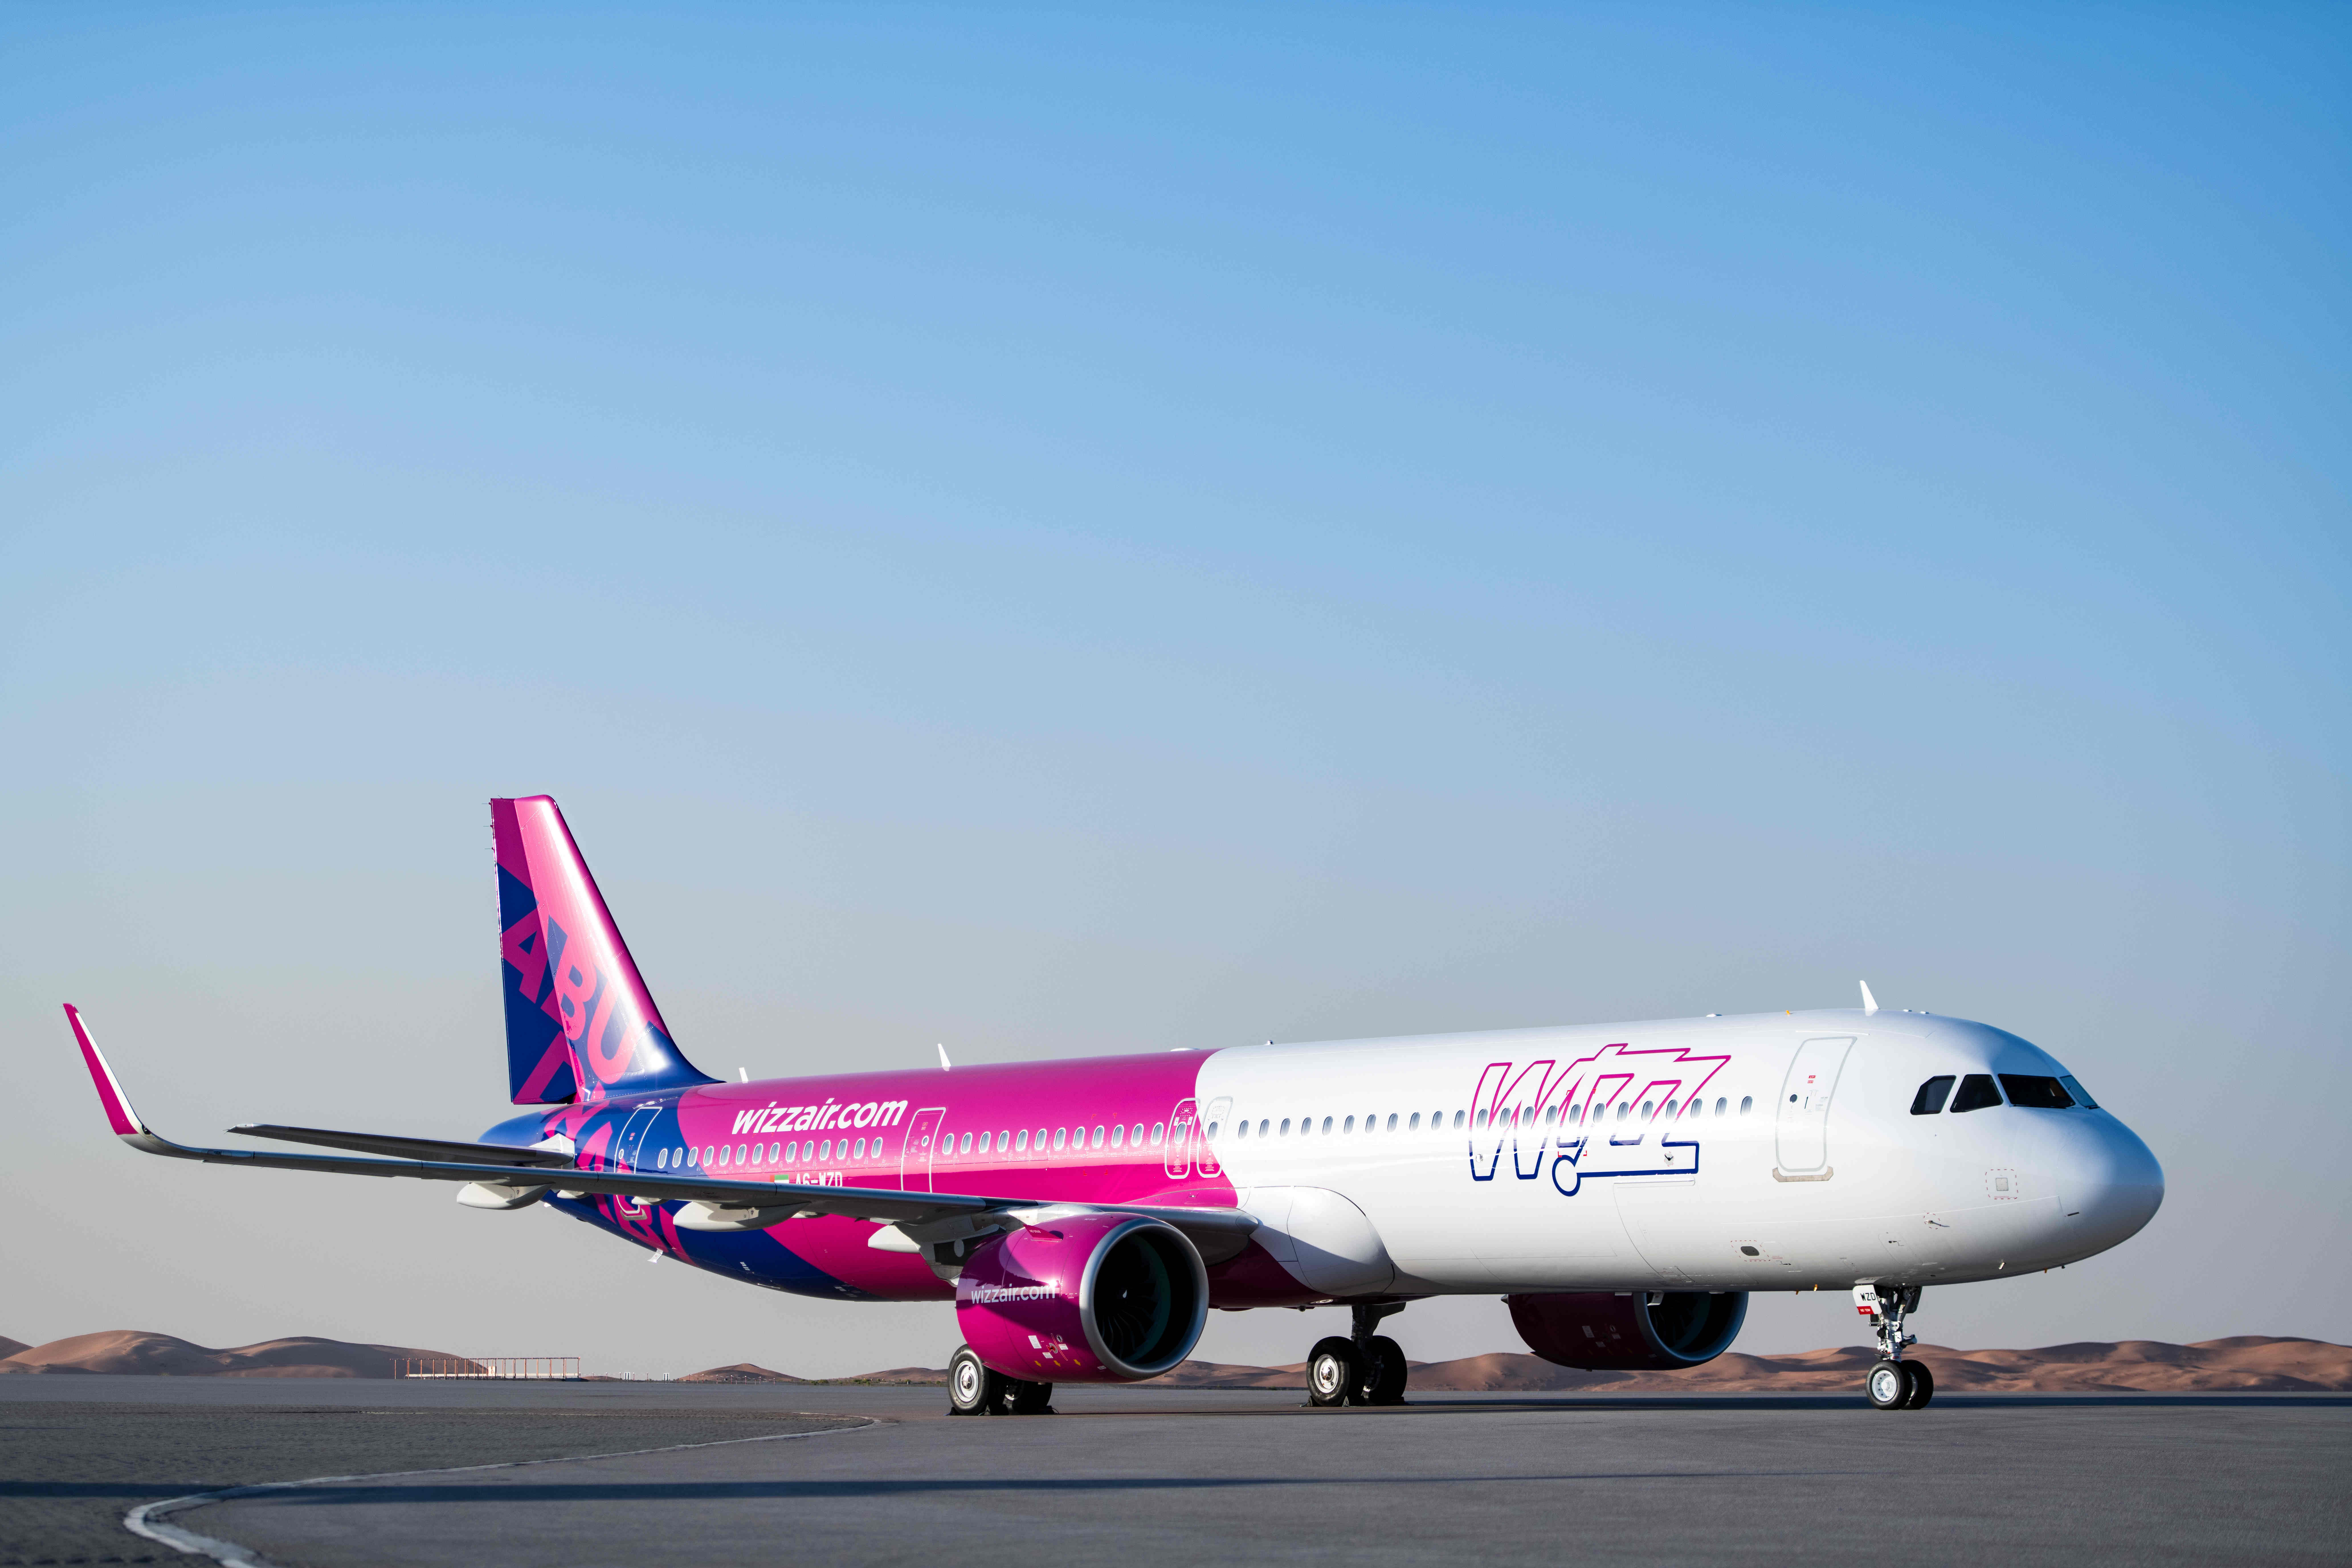 Wizz Air Abu Dhabi Continues To Expand Its Flight Network With The Addition Of Two New Destinations